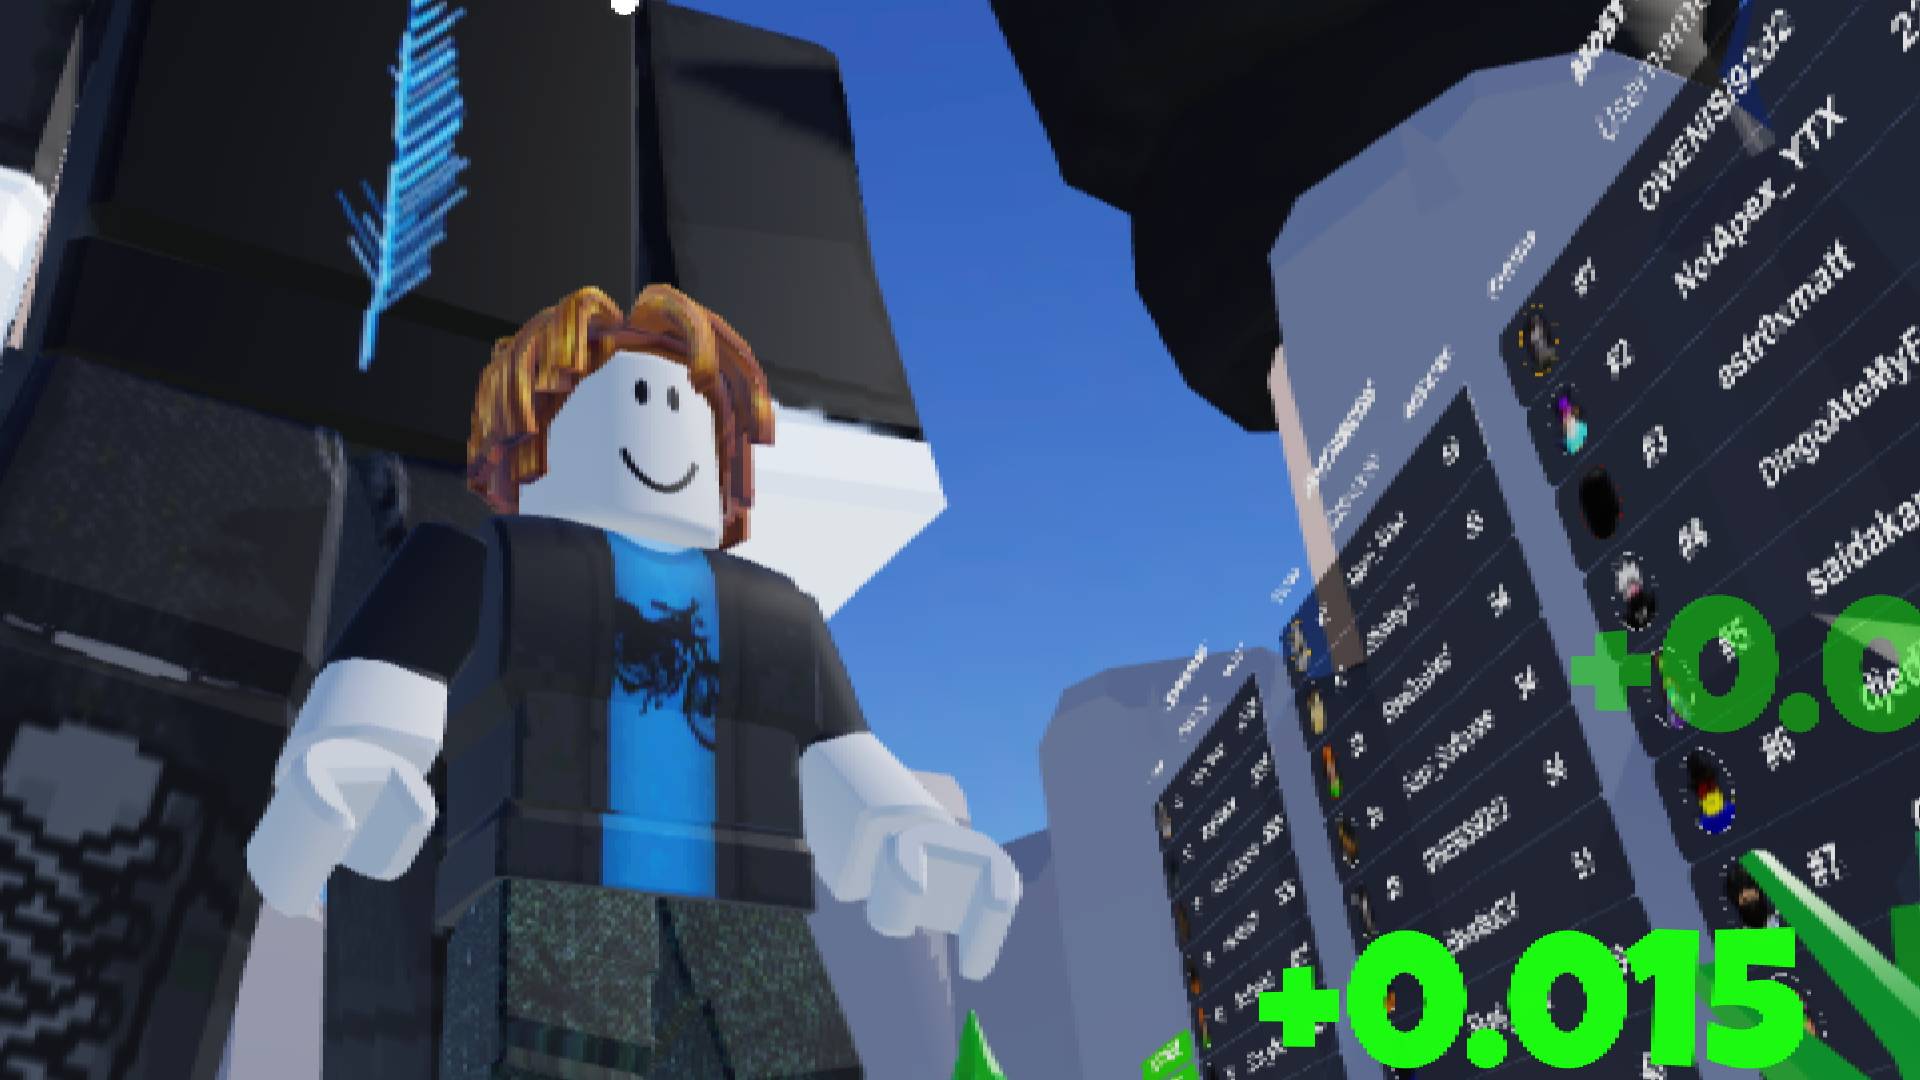 Roblox Backrooms Race Clicker codes for January 2023: Free wins